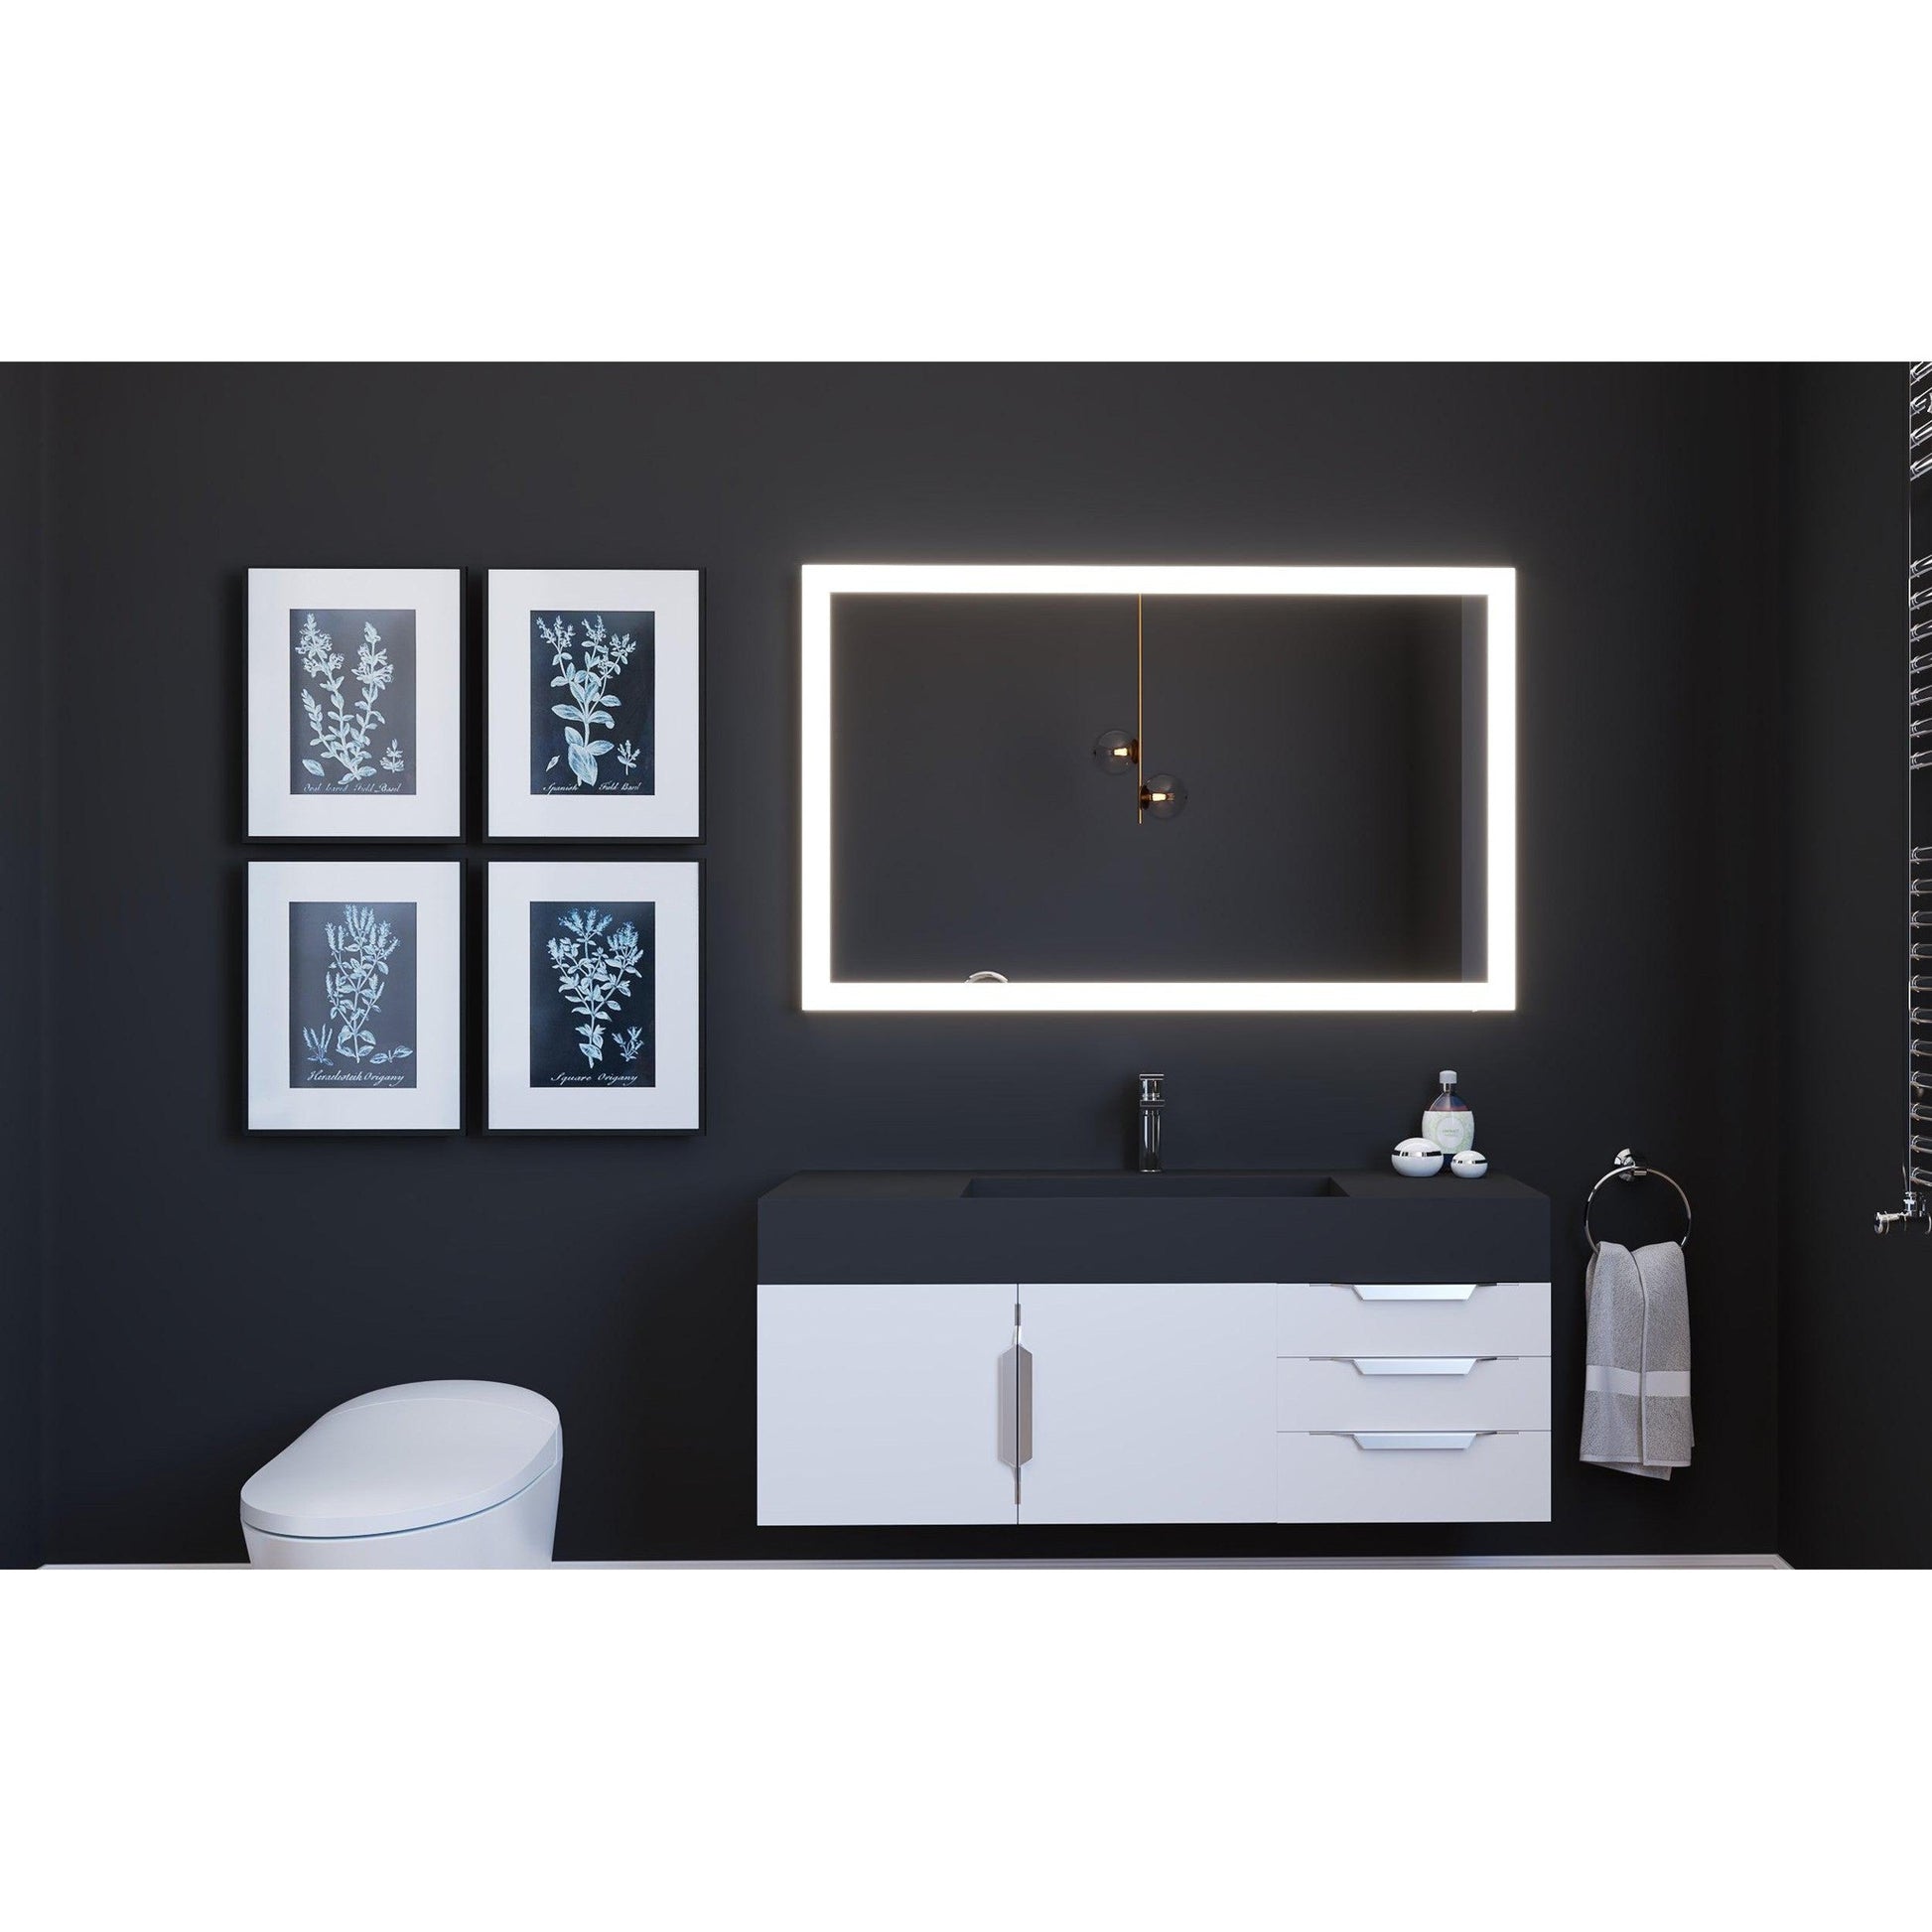 Castello USA Angelina 48" x 30" Dimmable LED Smart Mirror